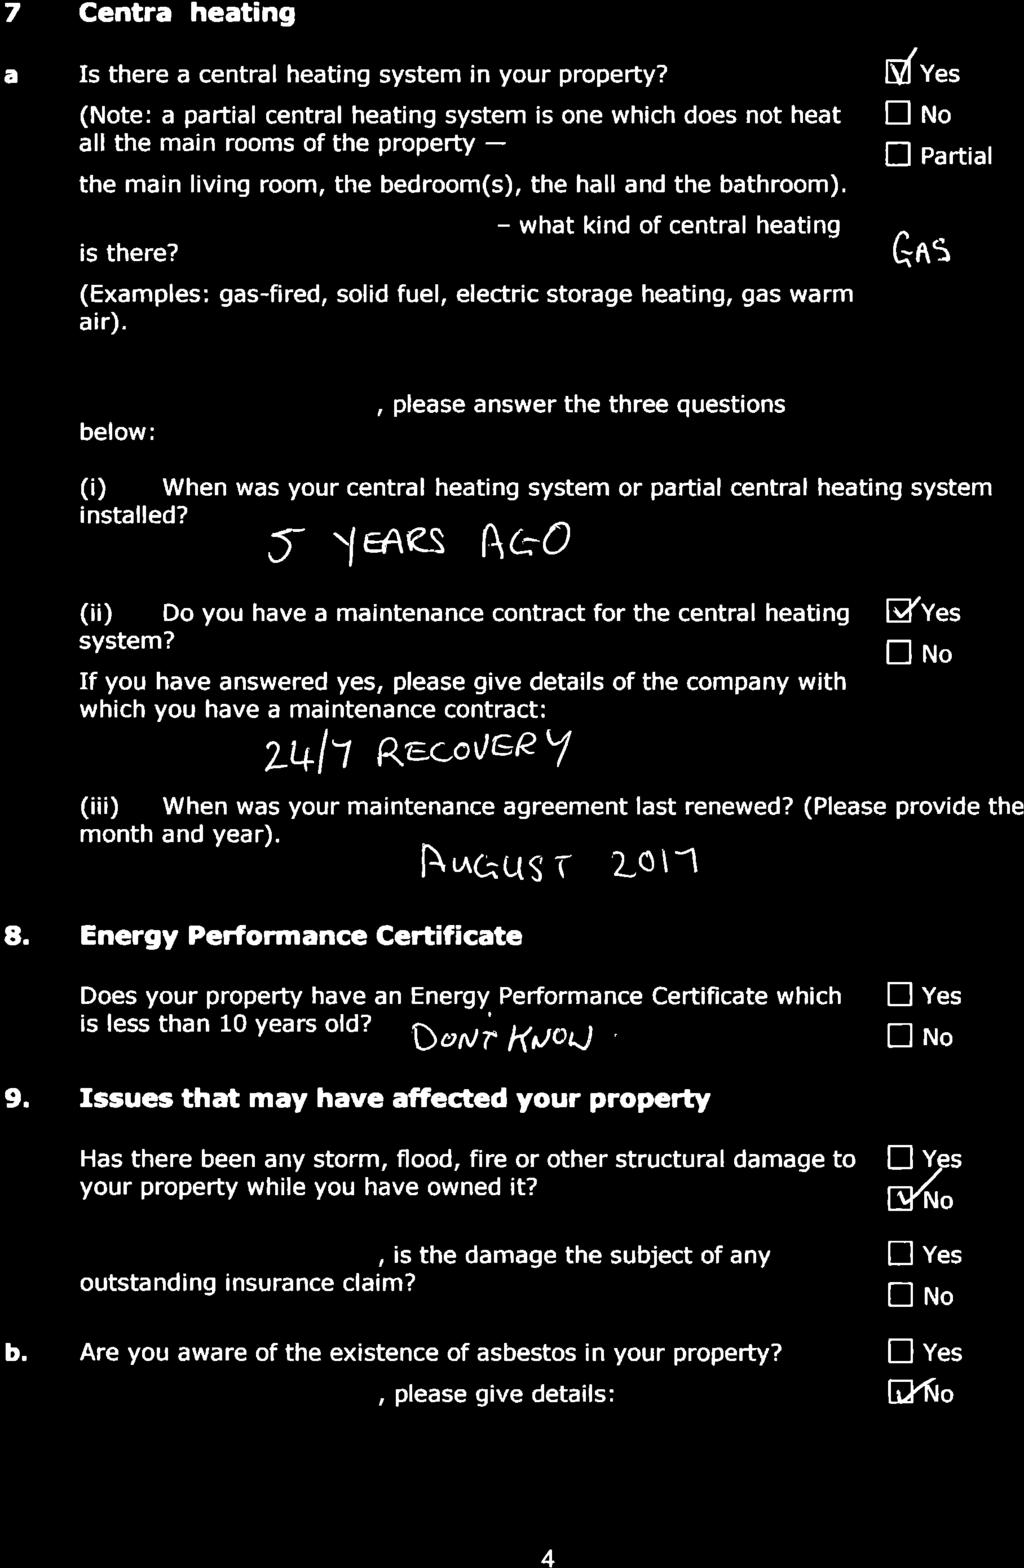 propedy questionnaire 7 Central heating a Is there a central heating system in your property?